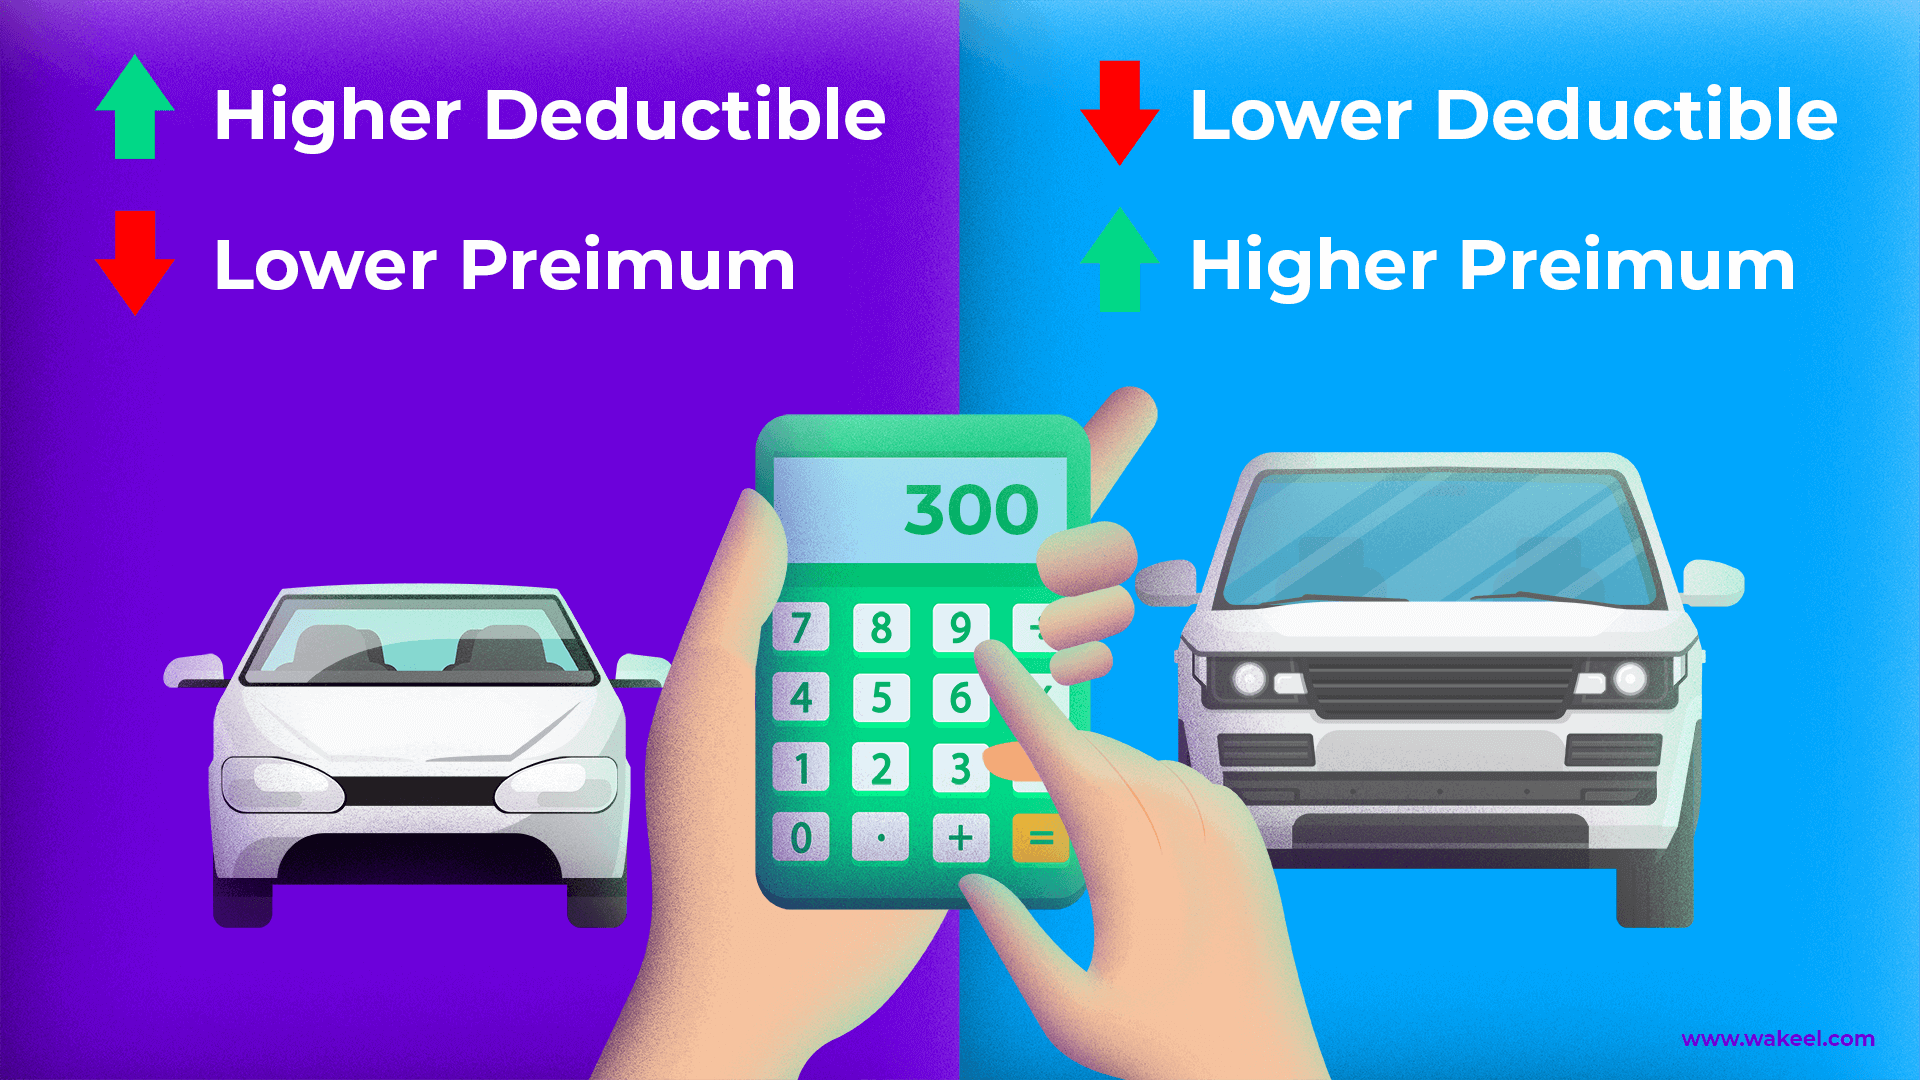 Car insurance deductibles and premiums tend to have an inverse relationship.